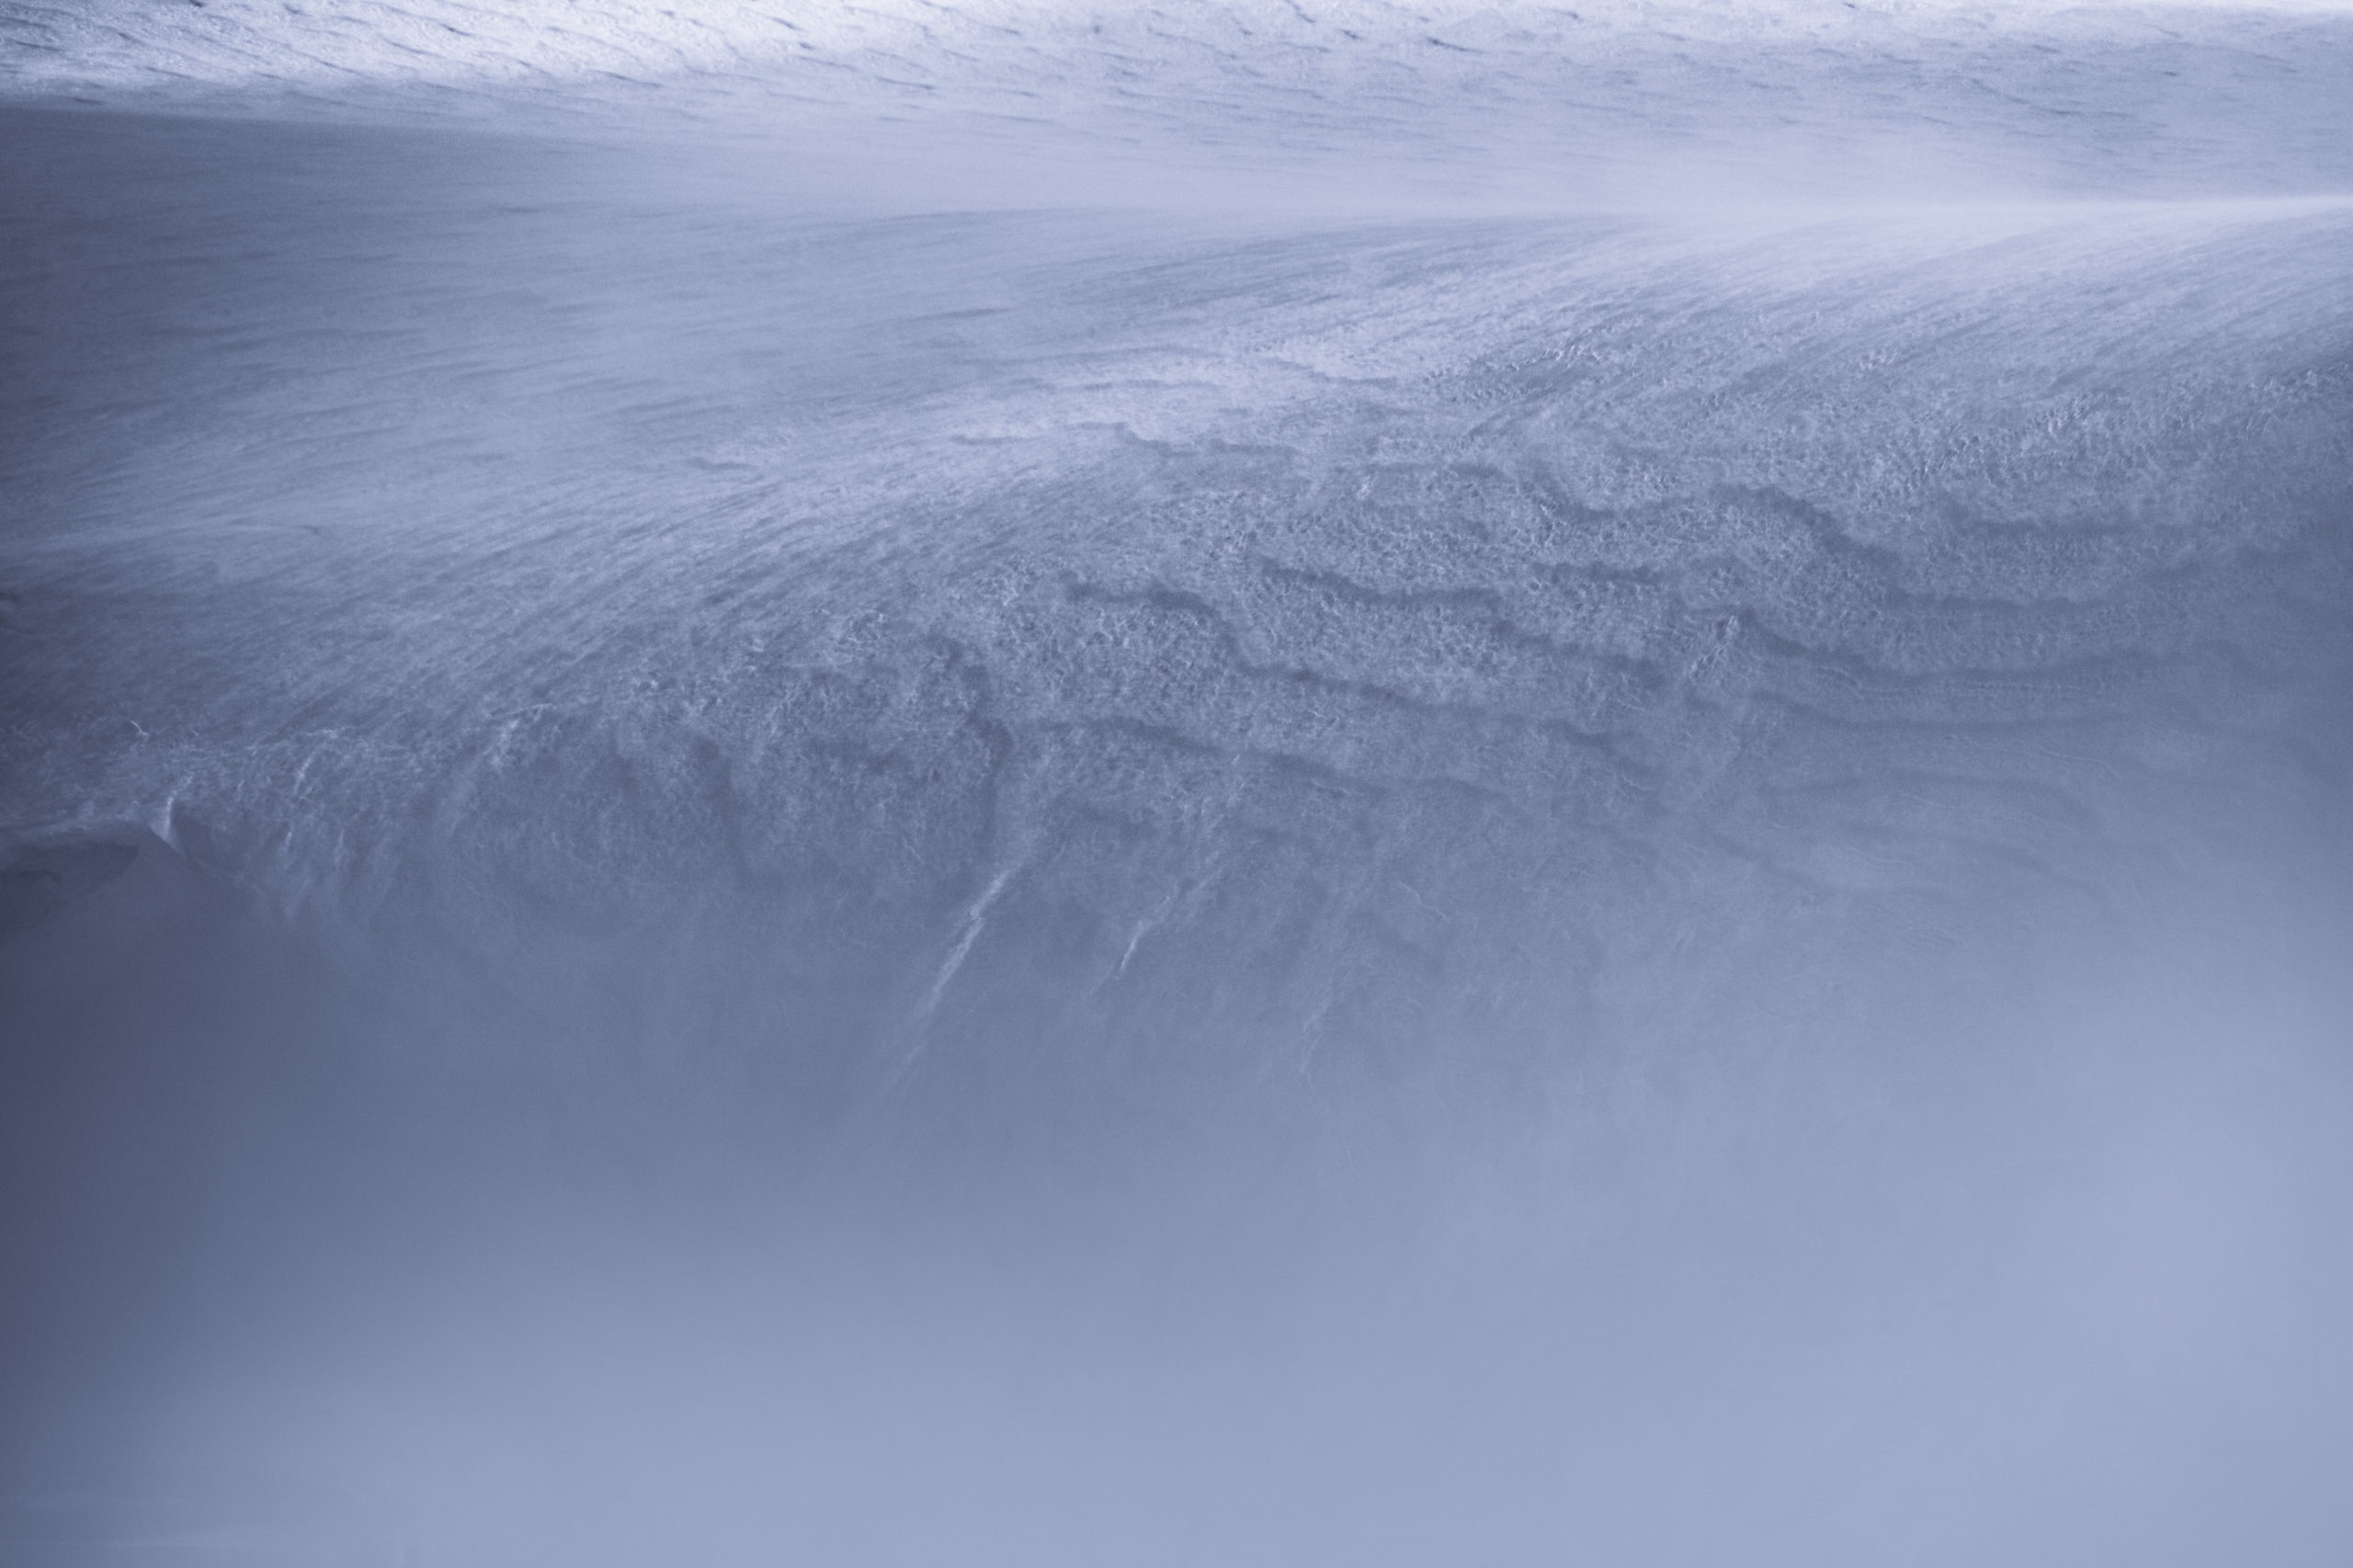 Abstract landscape photography of windswept snow patterns on a mountain in Antarctica